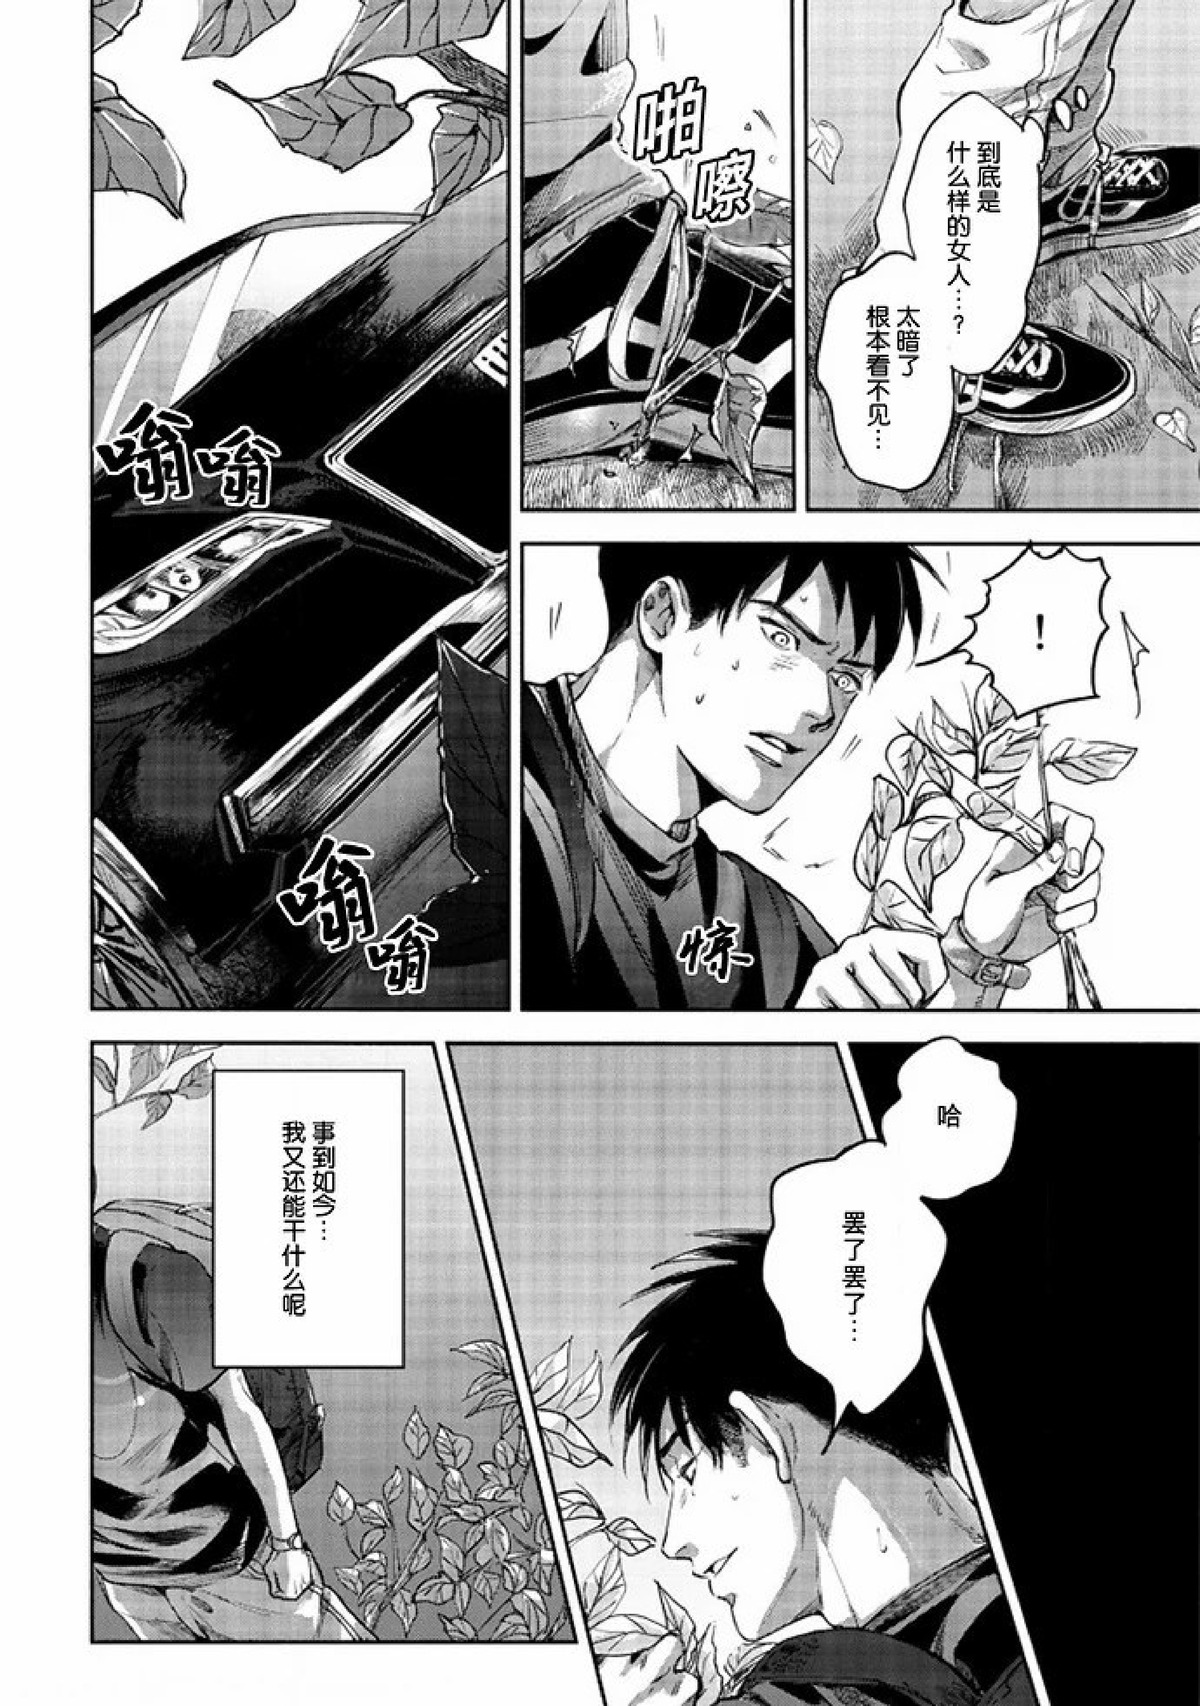 【Two sides of the same coin[耽美]】漫画-（上卷01-02）章节漫画下拉式图片-29.jpg